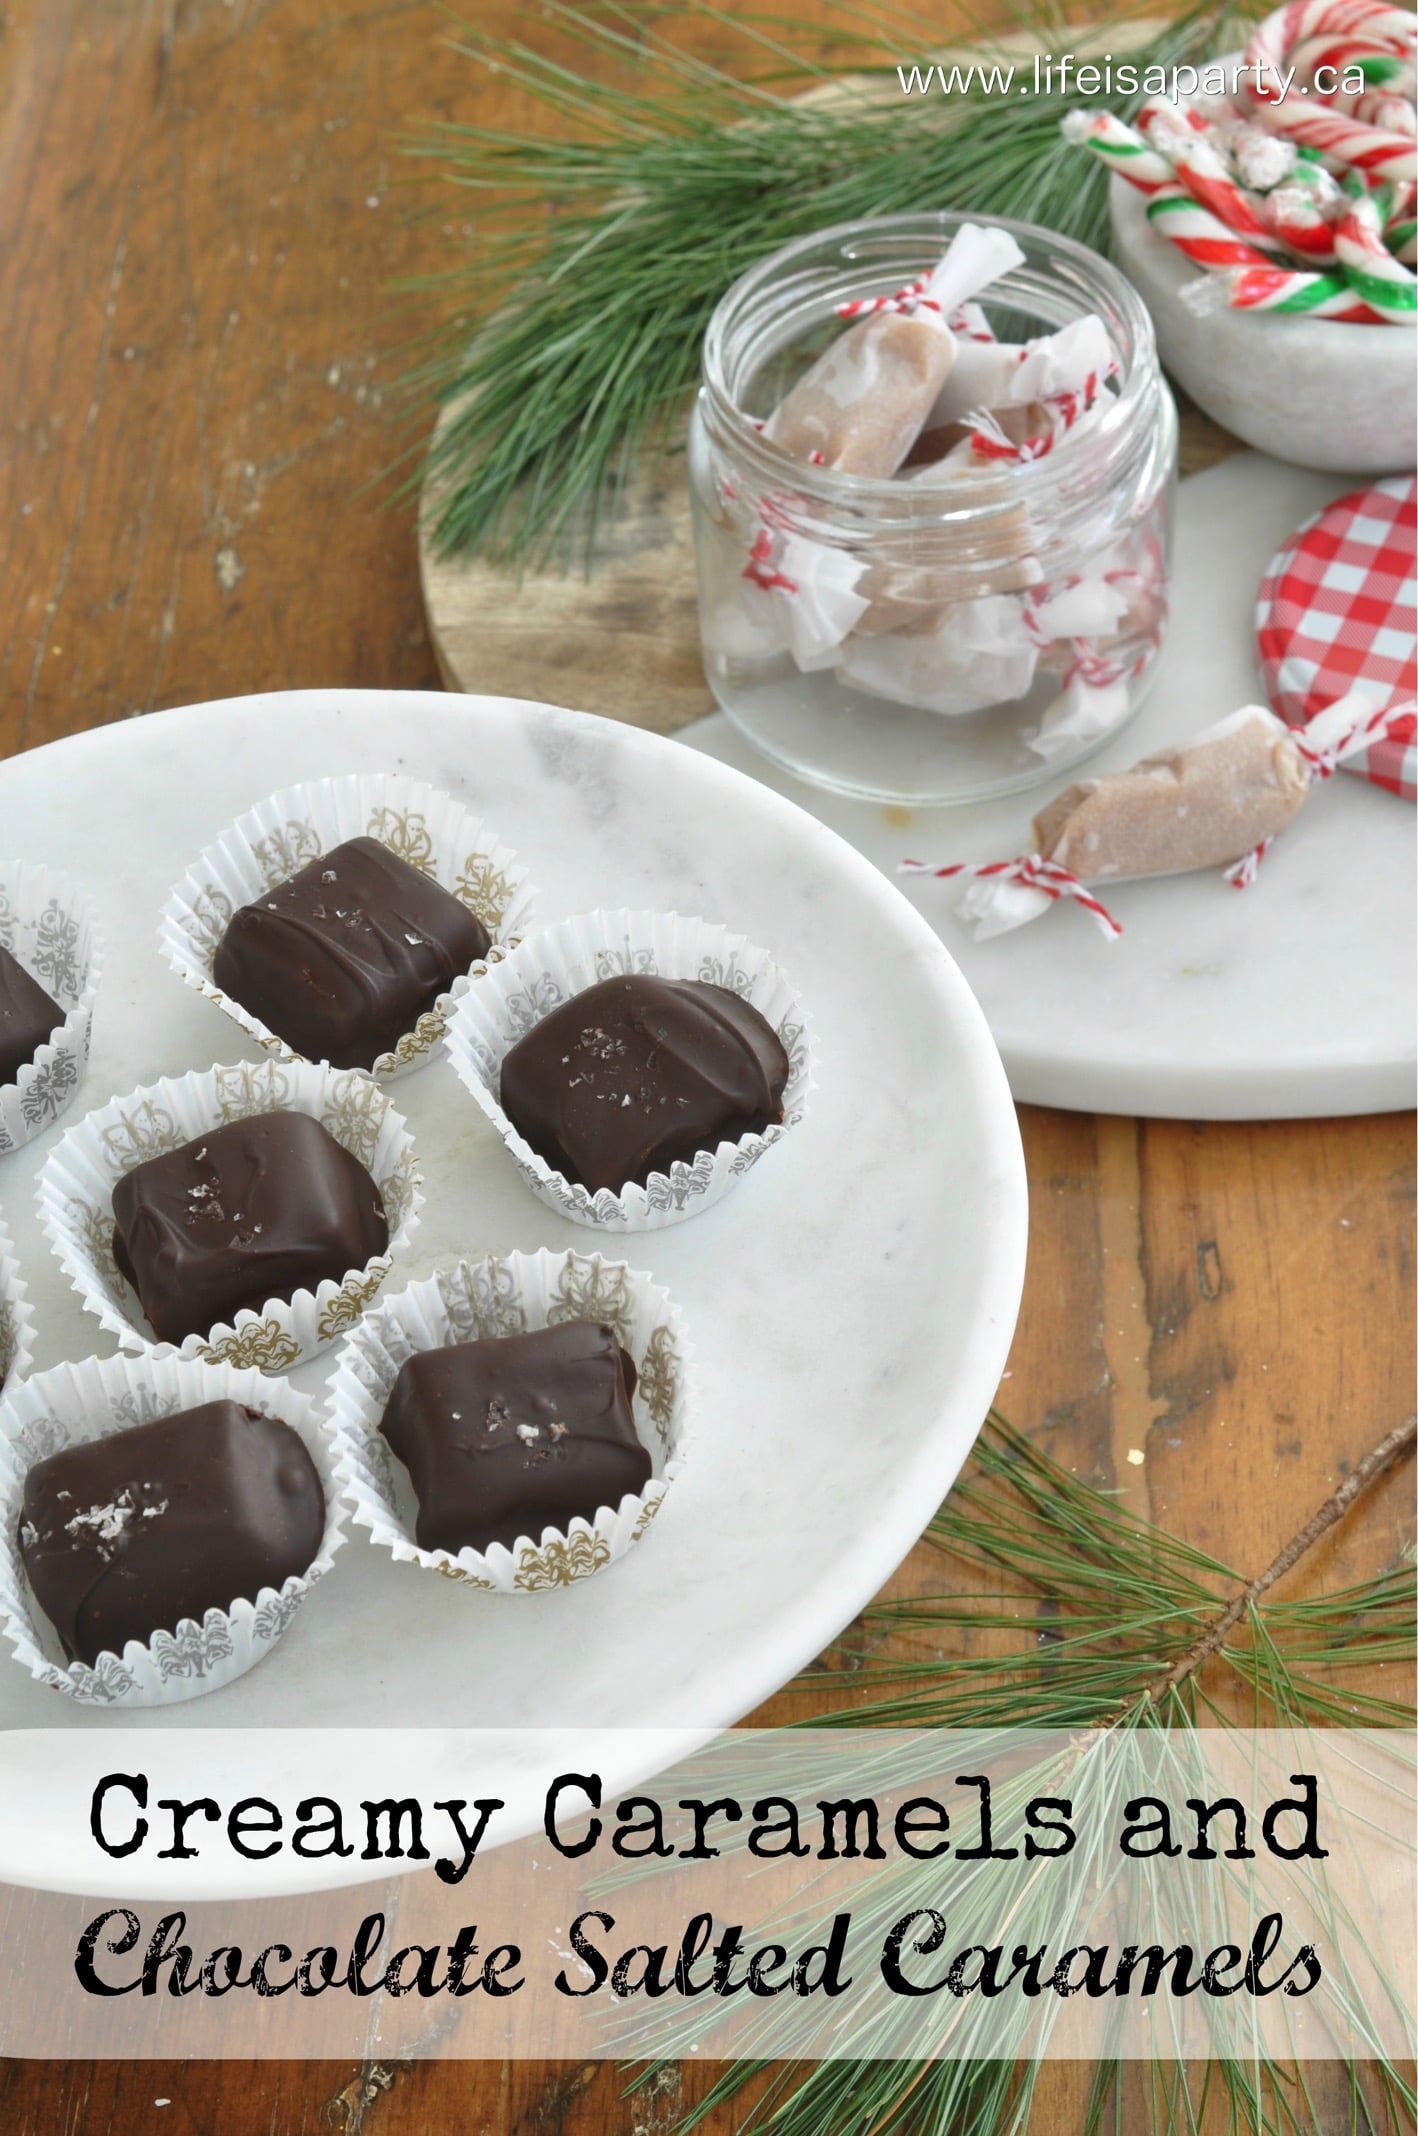 How To Make Creamy Caramels and Chocolate Salted Caramels